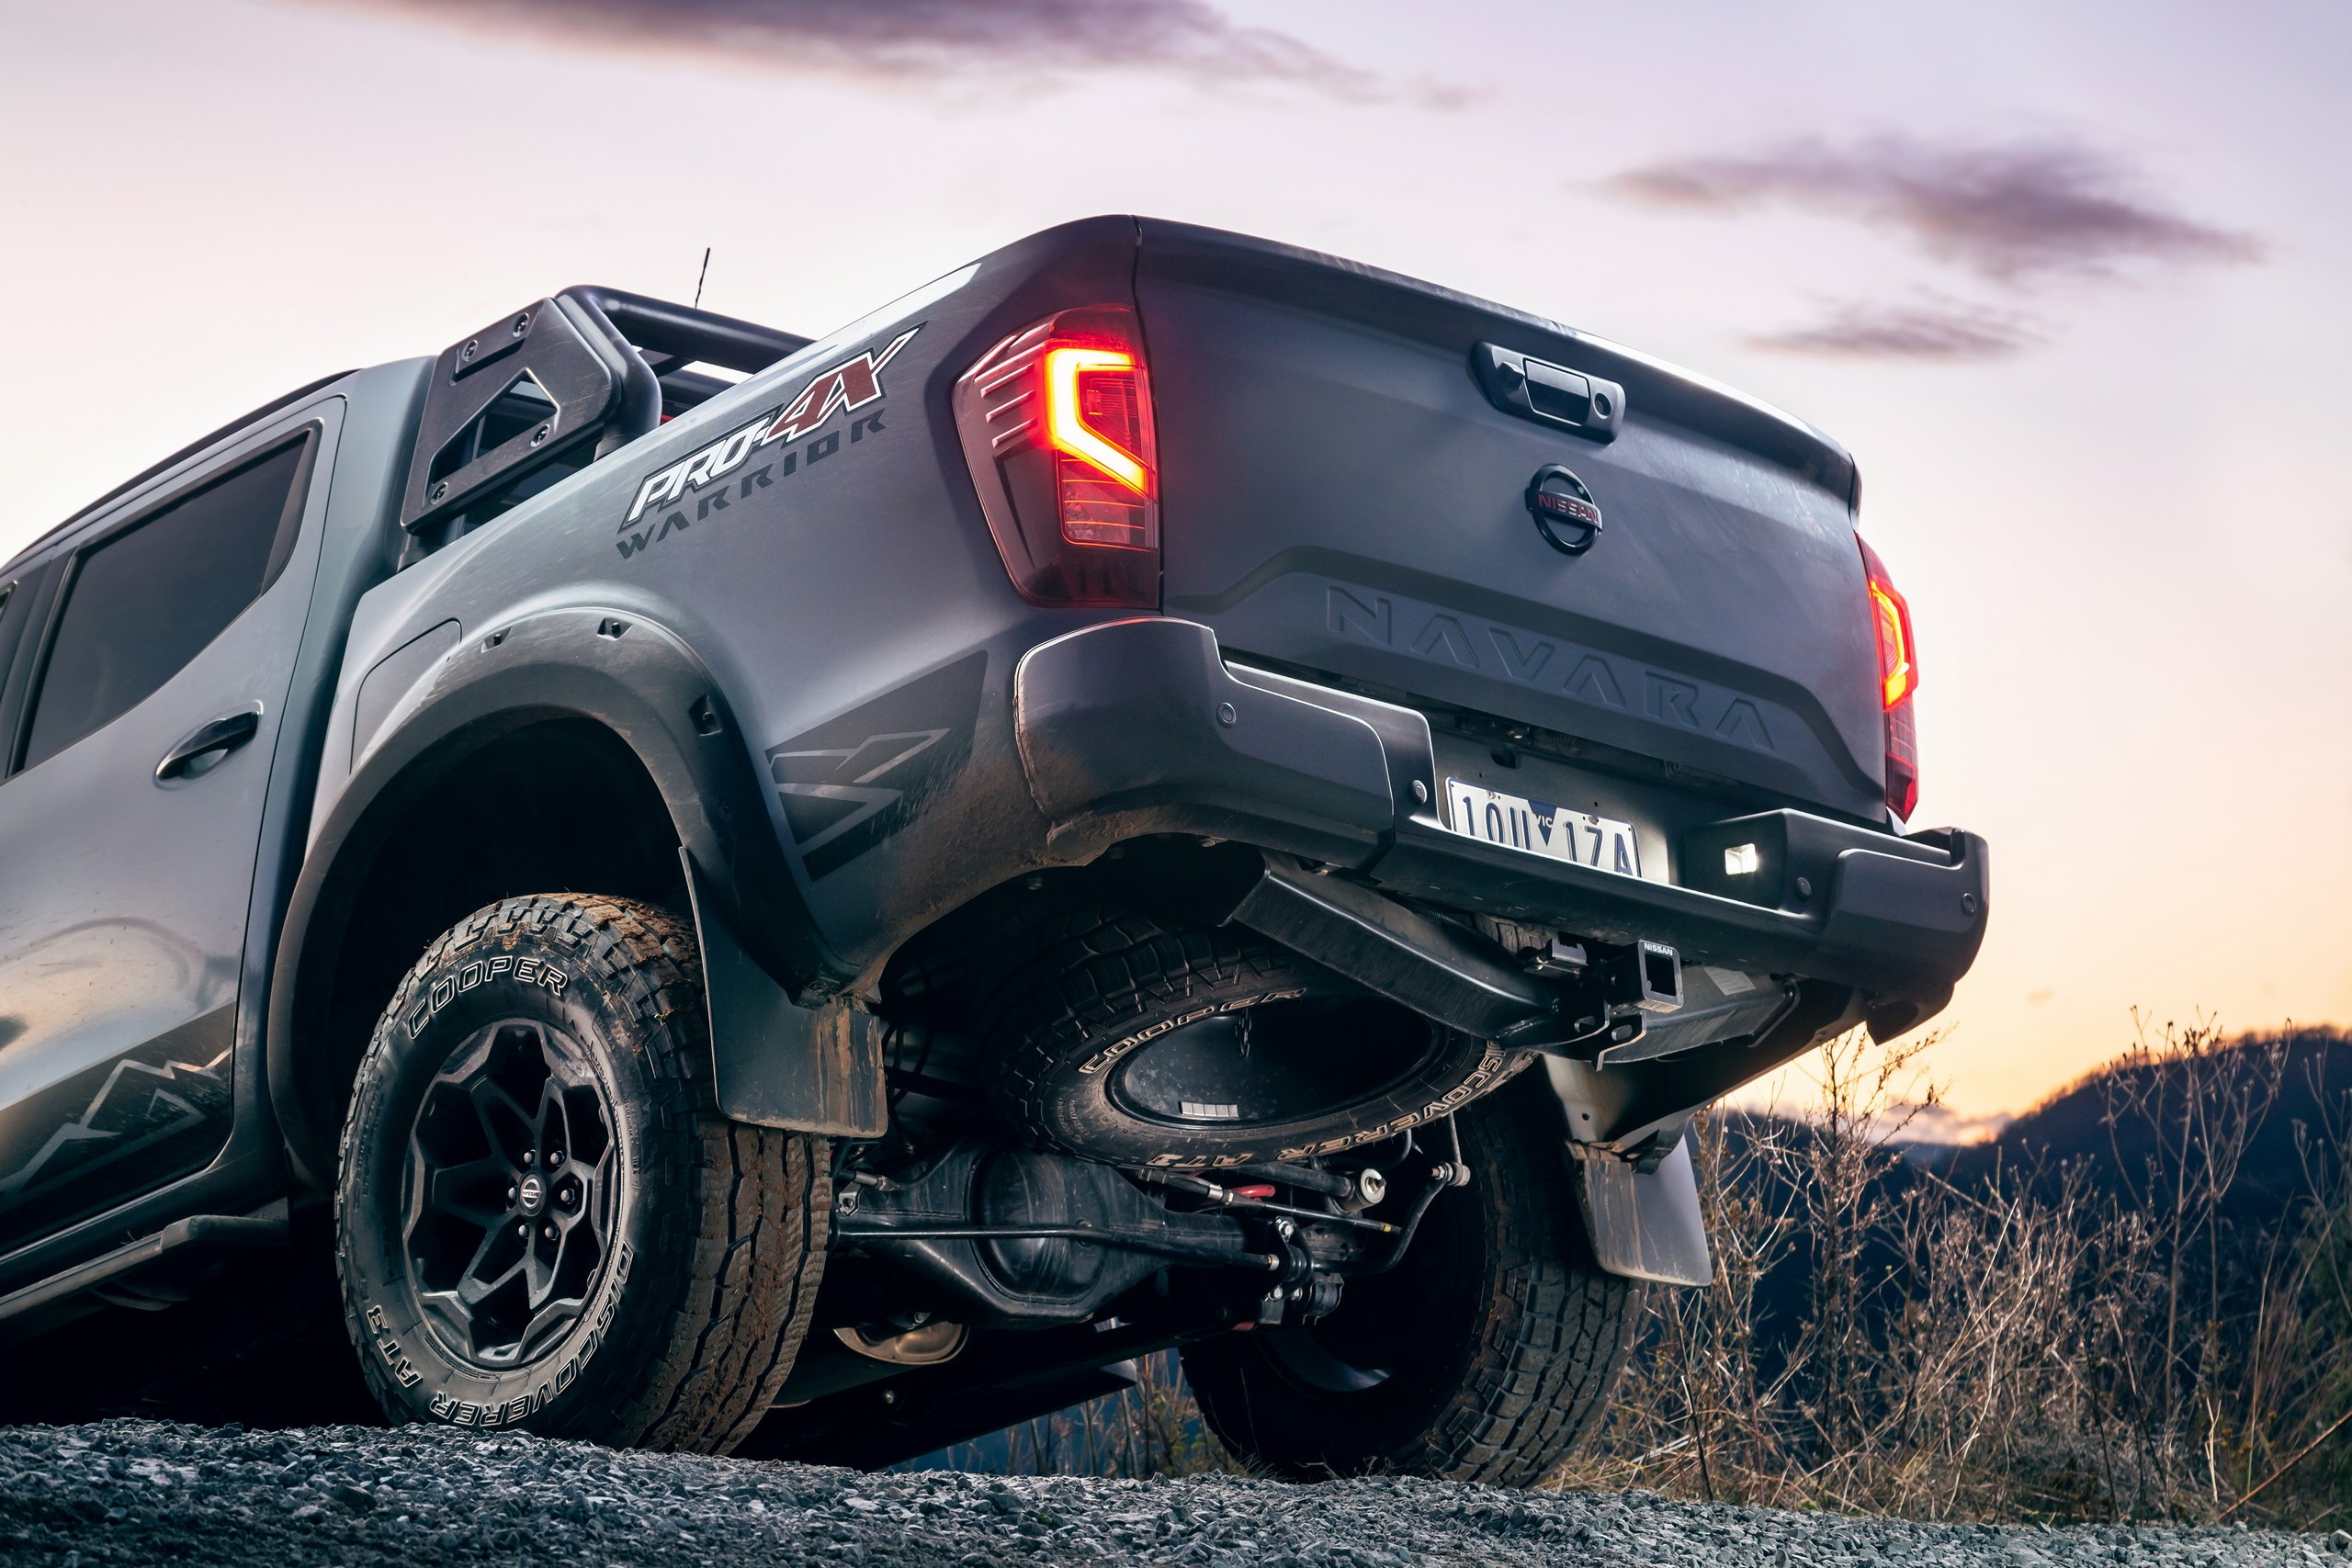 australias nissan navara pro 4x warrior is the frontier you want in the states 1